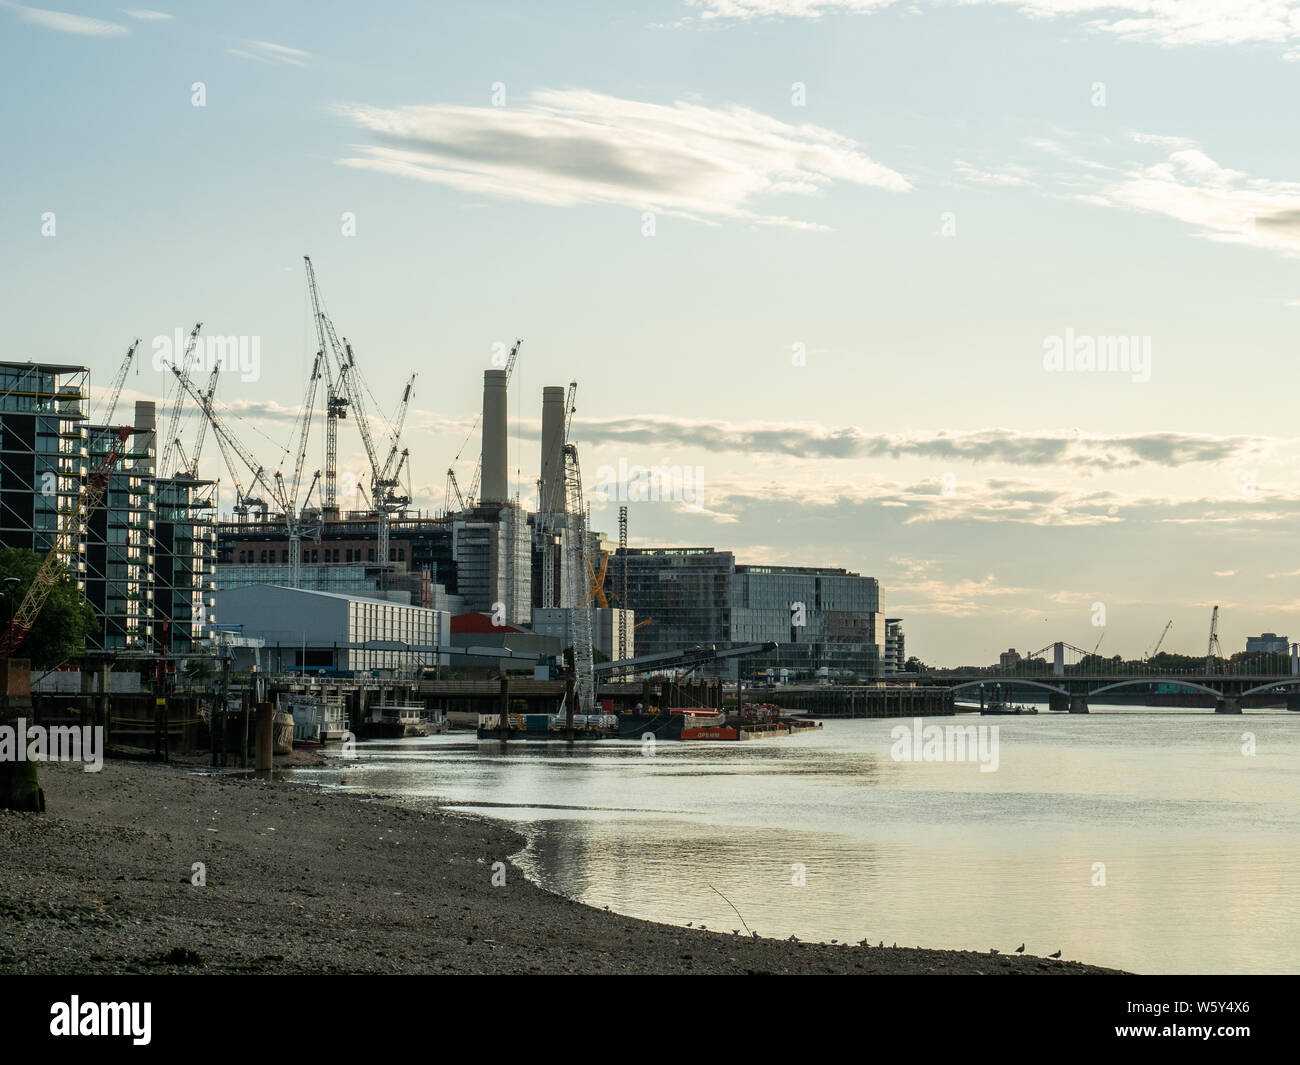 The decommissioned Battersea Power Station on the south bank of the River Thames, Battersea, London. Stock Photo